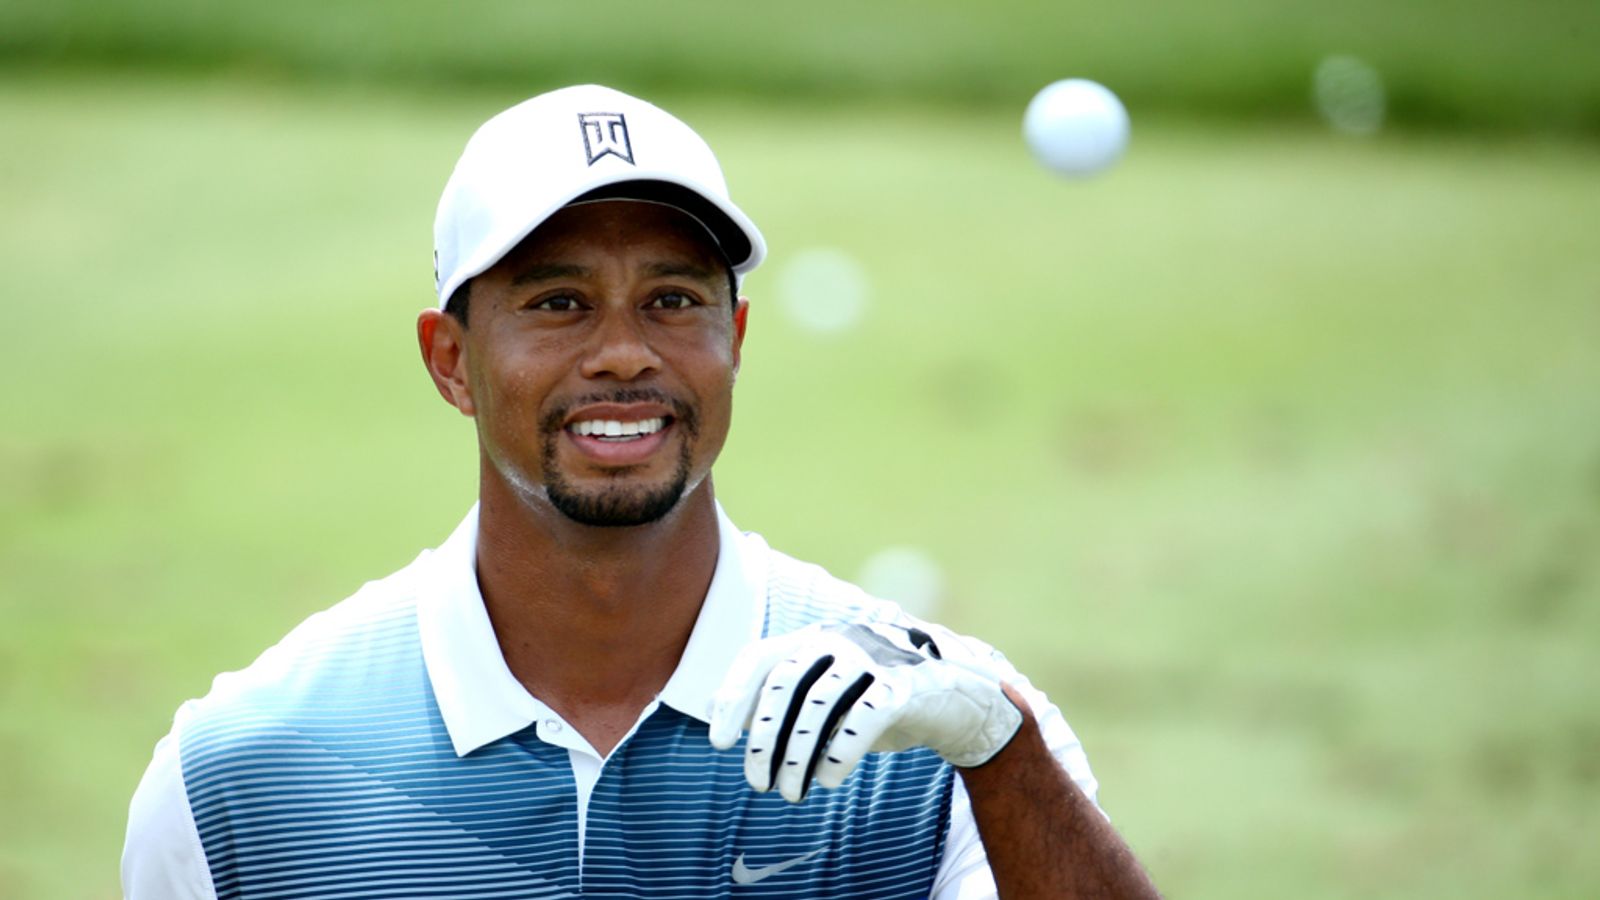 US PGA Championship Tiger Woods says he is pain free and ready to play